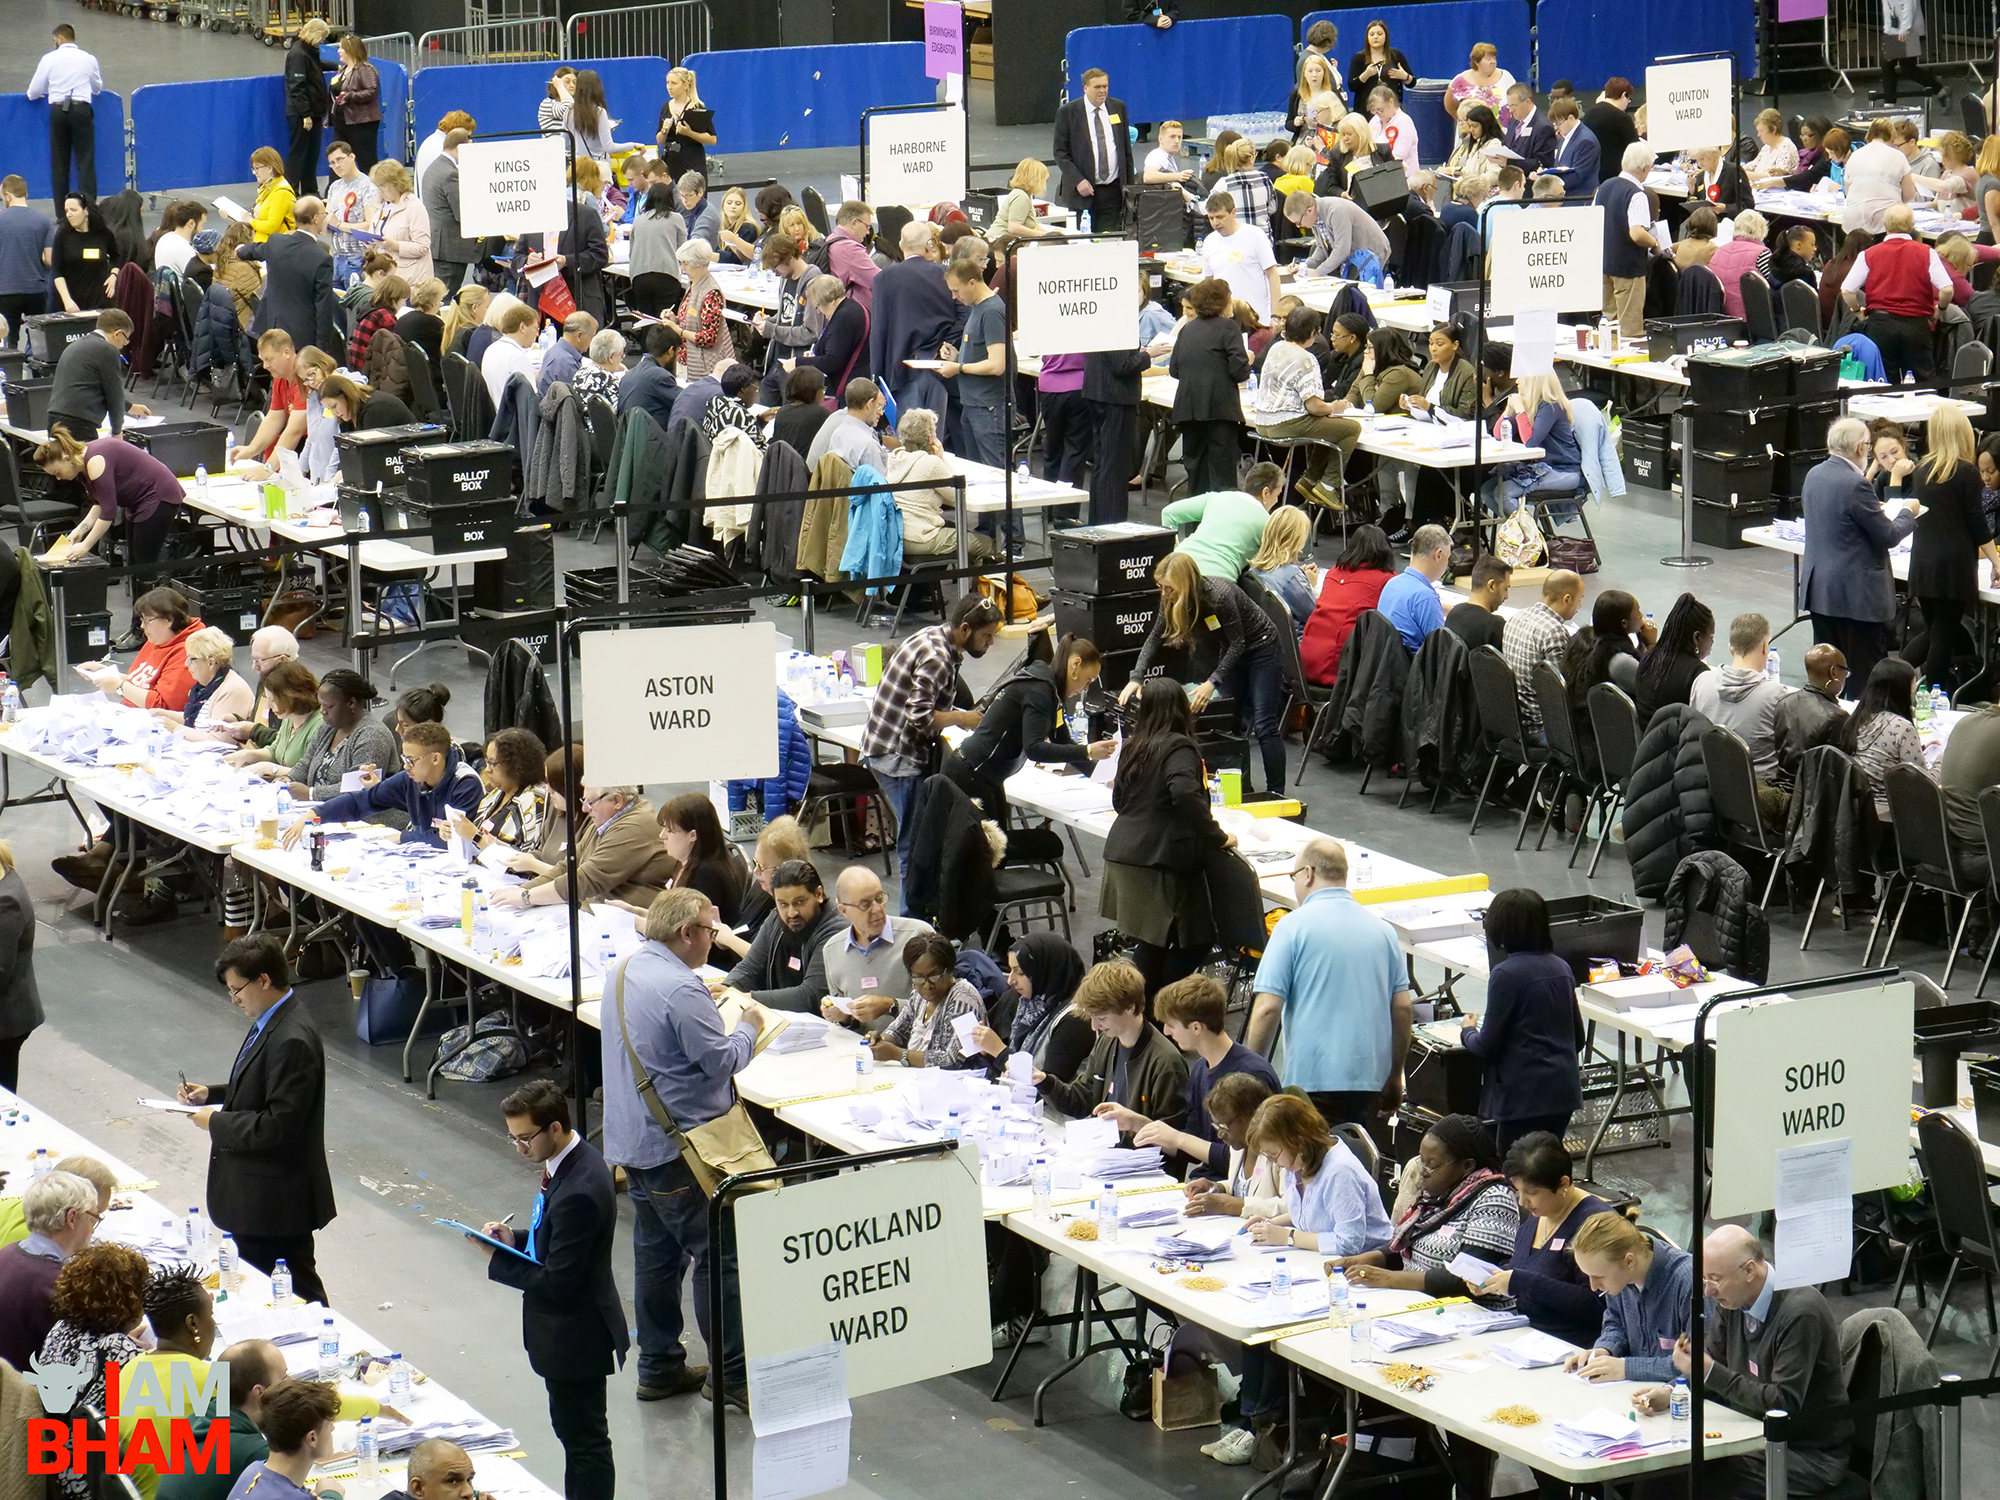 The West Midlands Mayoral Election vote count gets underway at the Barclaycard Arena in Birmingham